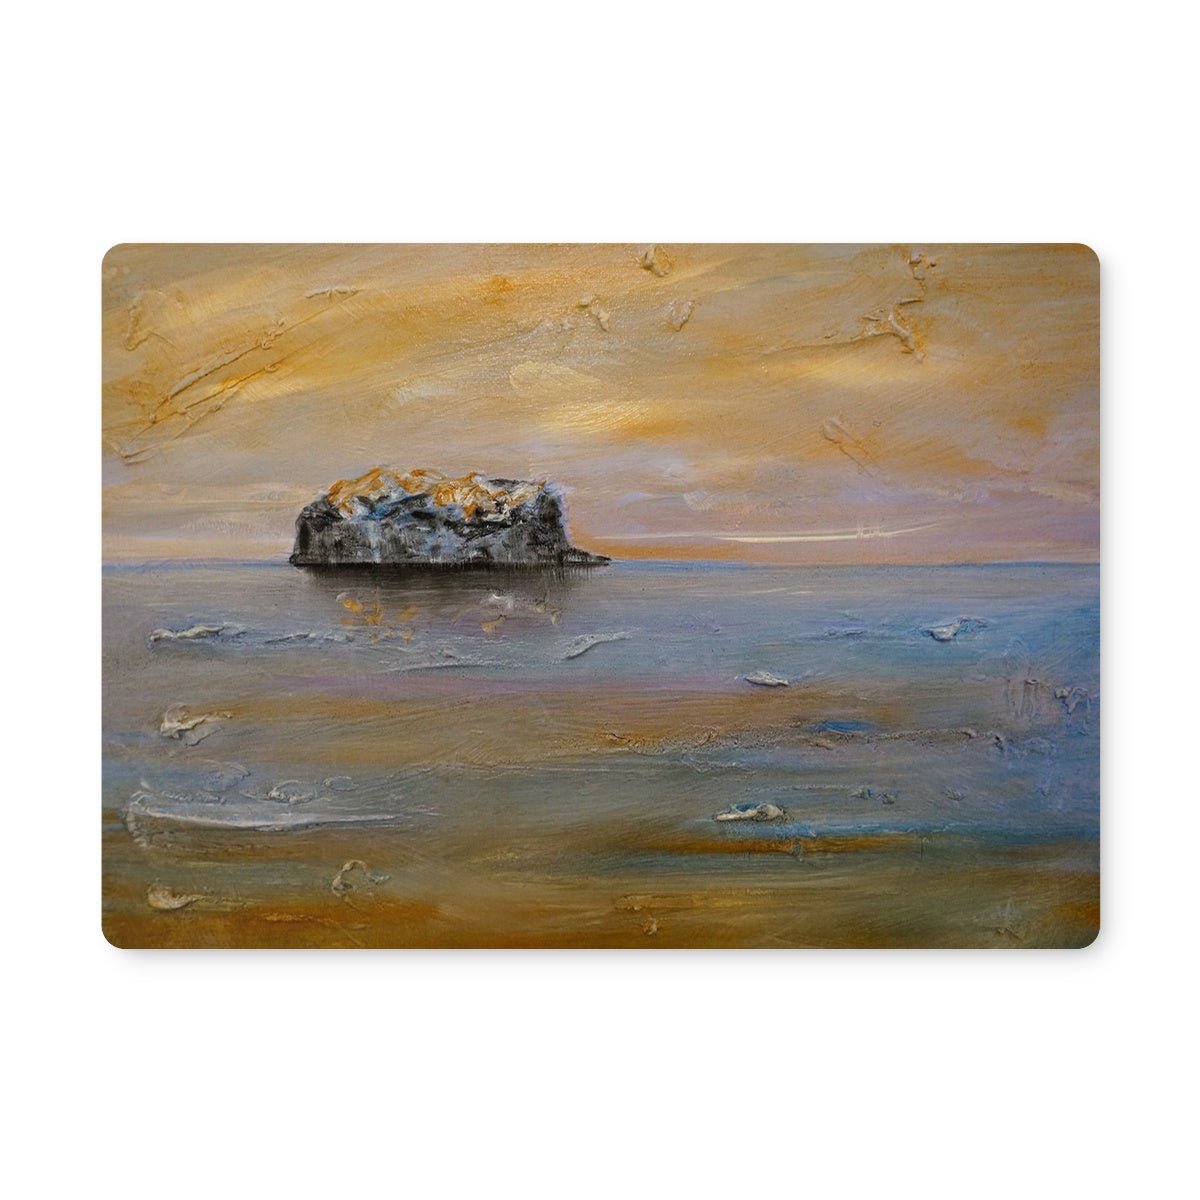 Bass Rock Dawn Art Gifts Placemat-Placemats-Edinburgh & Glasgow Art Gallery-6 Placemats-Paintings, Prints, Homeware, Art Gifts From Scotland By Scottish Artist Kevin Hunter